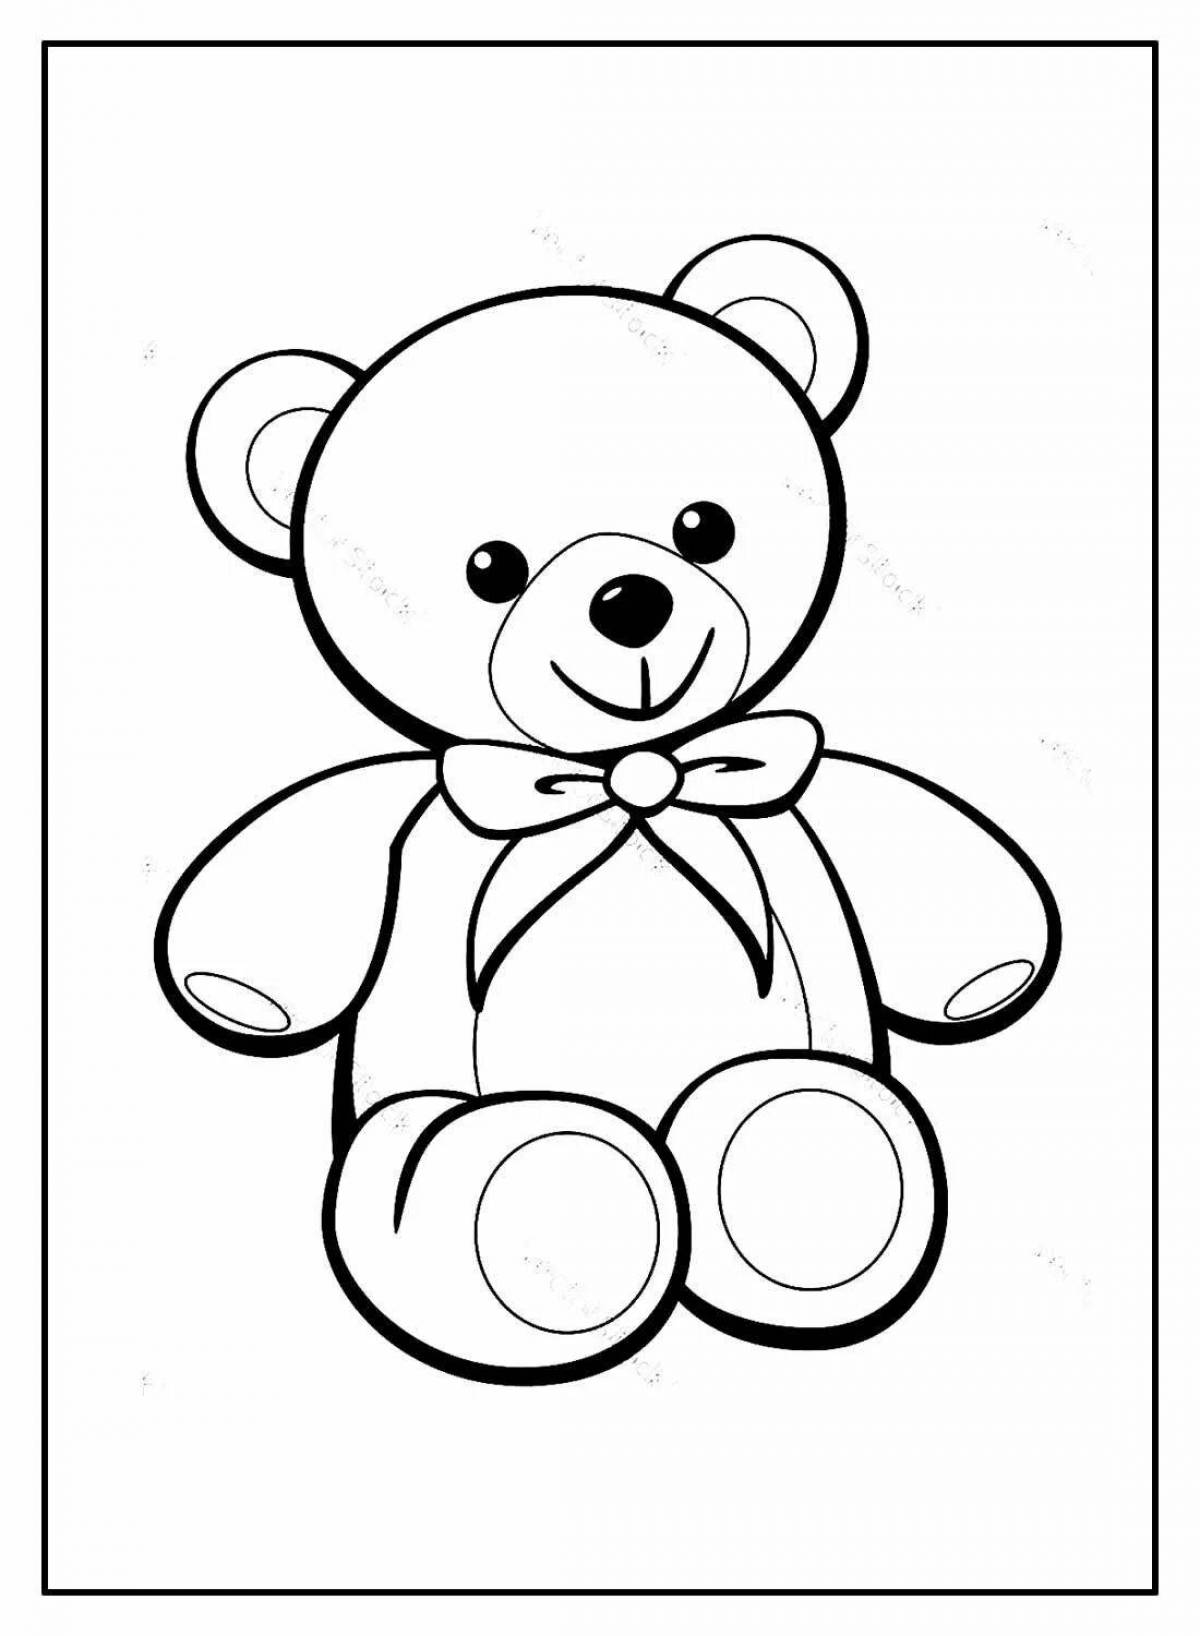 Coloring bright bear with a bow